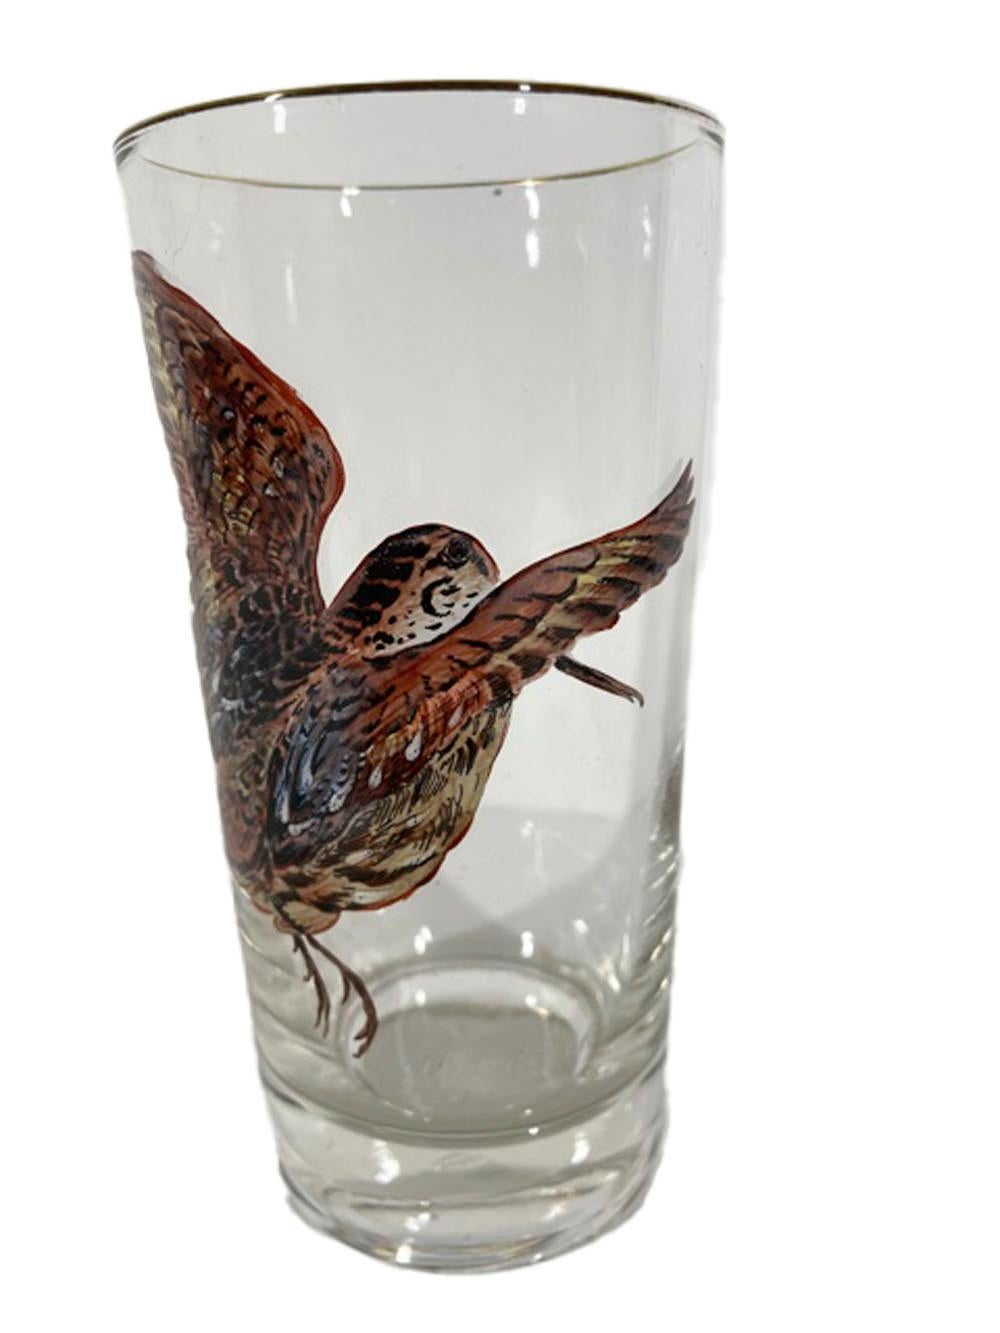 Eight vintage highball glasses designed by Ned Smith for Federal Glass, each hand painted with a different game bird and species name.